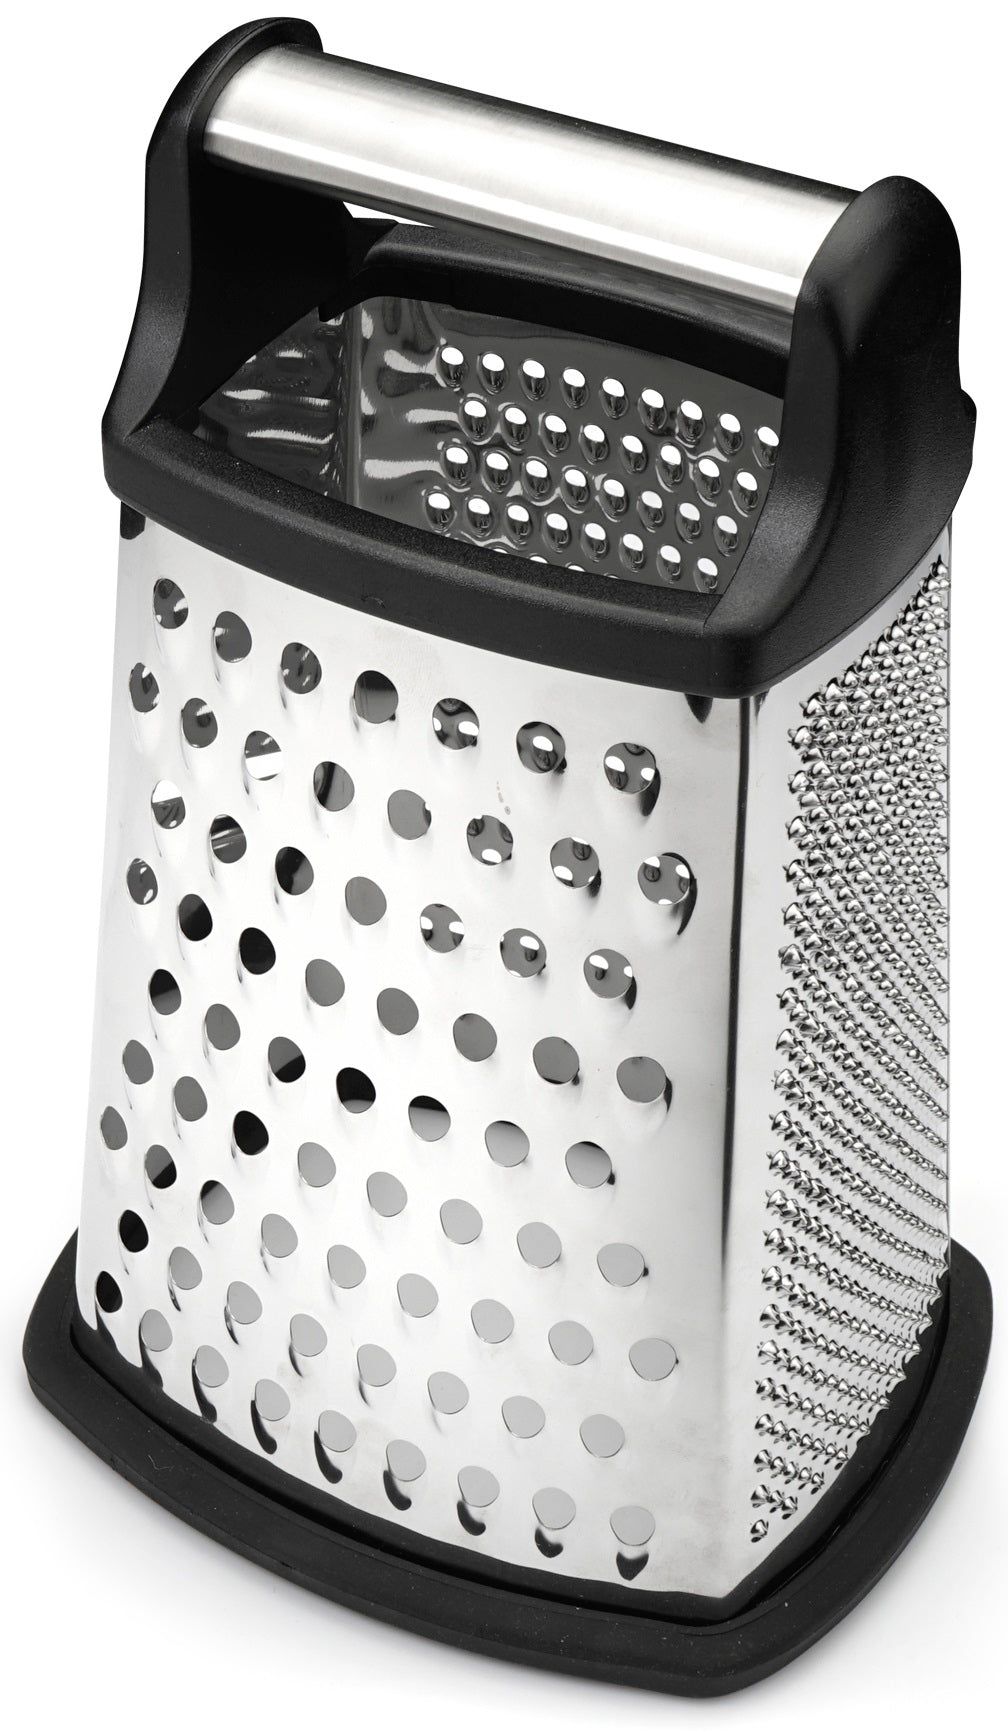 Cuisinart Box Grater 4 Surfaces New Stainless, Grate Shred Julienne Slice  Zest